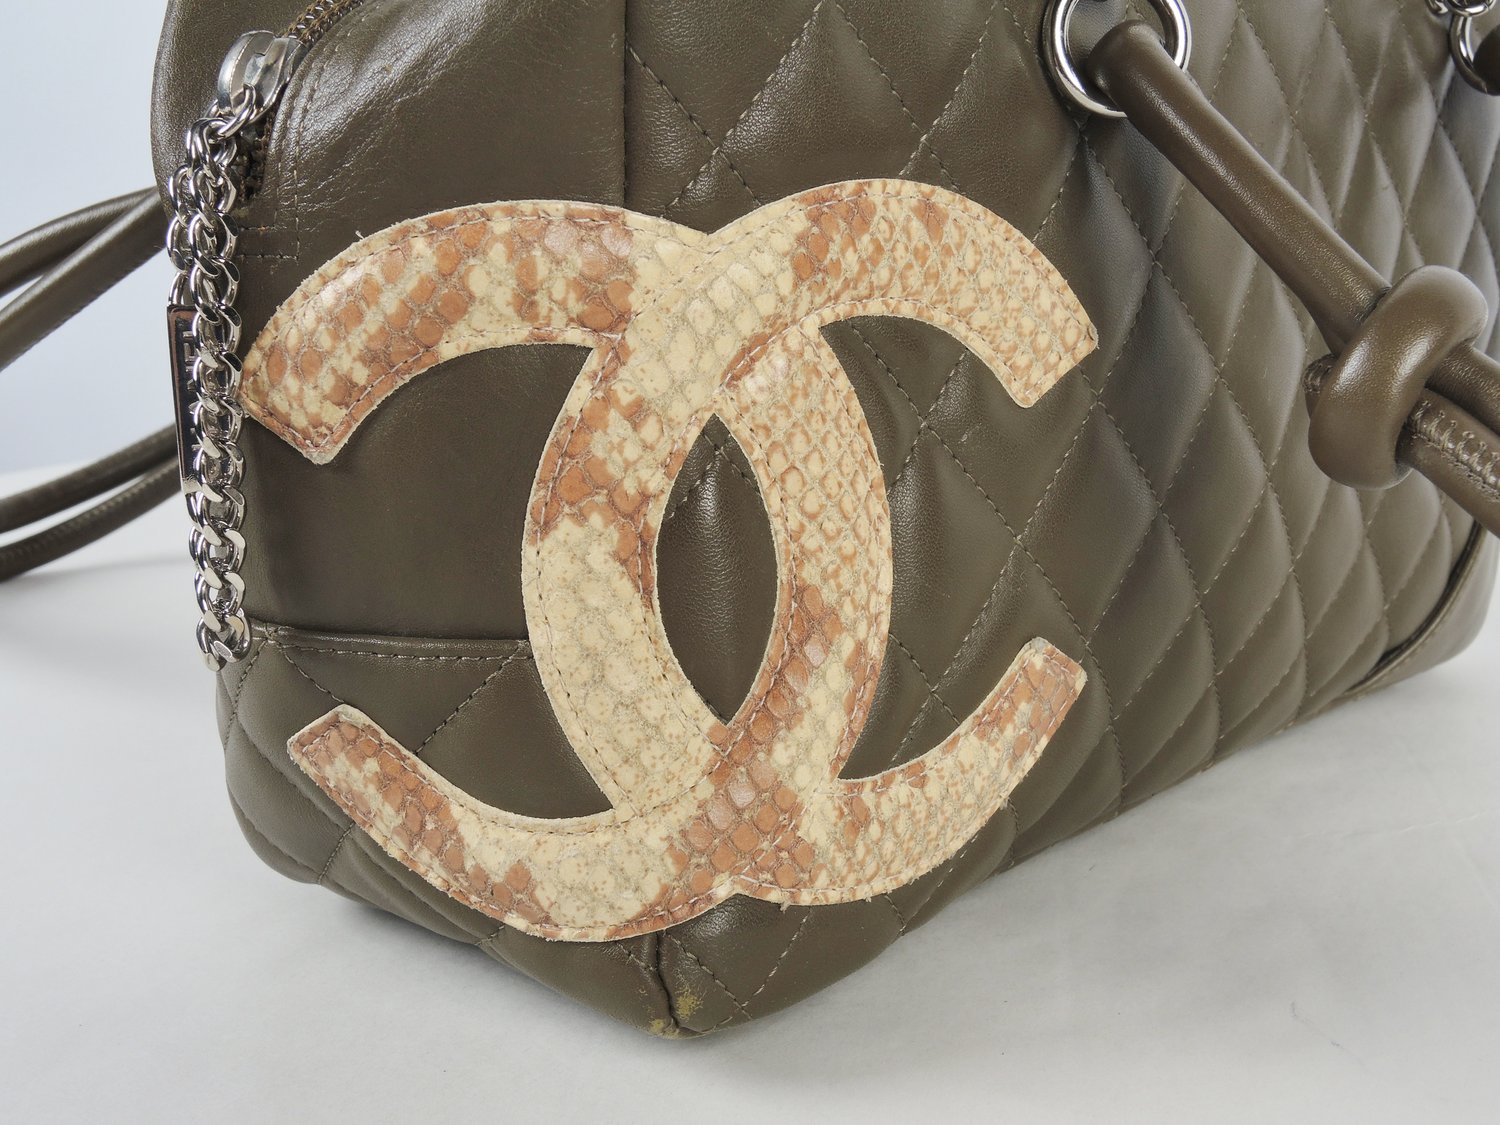 CHANEL Calfskin Cambon Ligne Bowler — Seams to Fit Women's Consignment